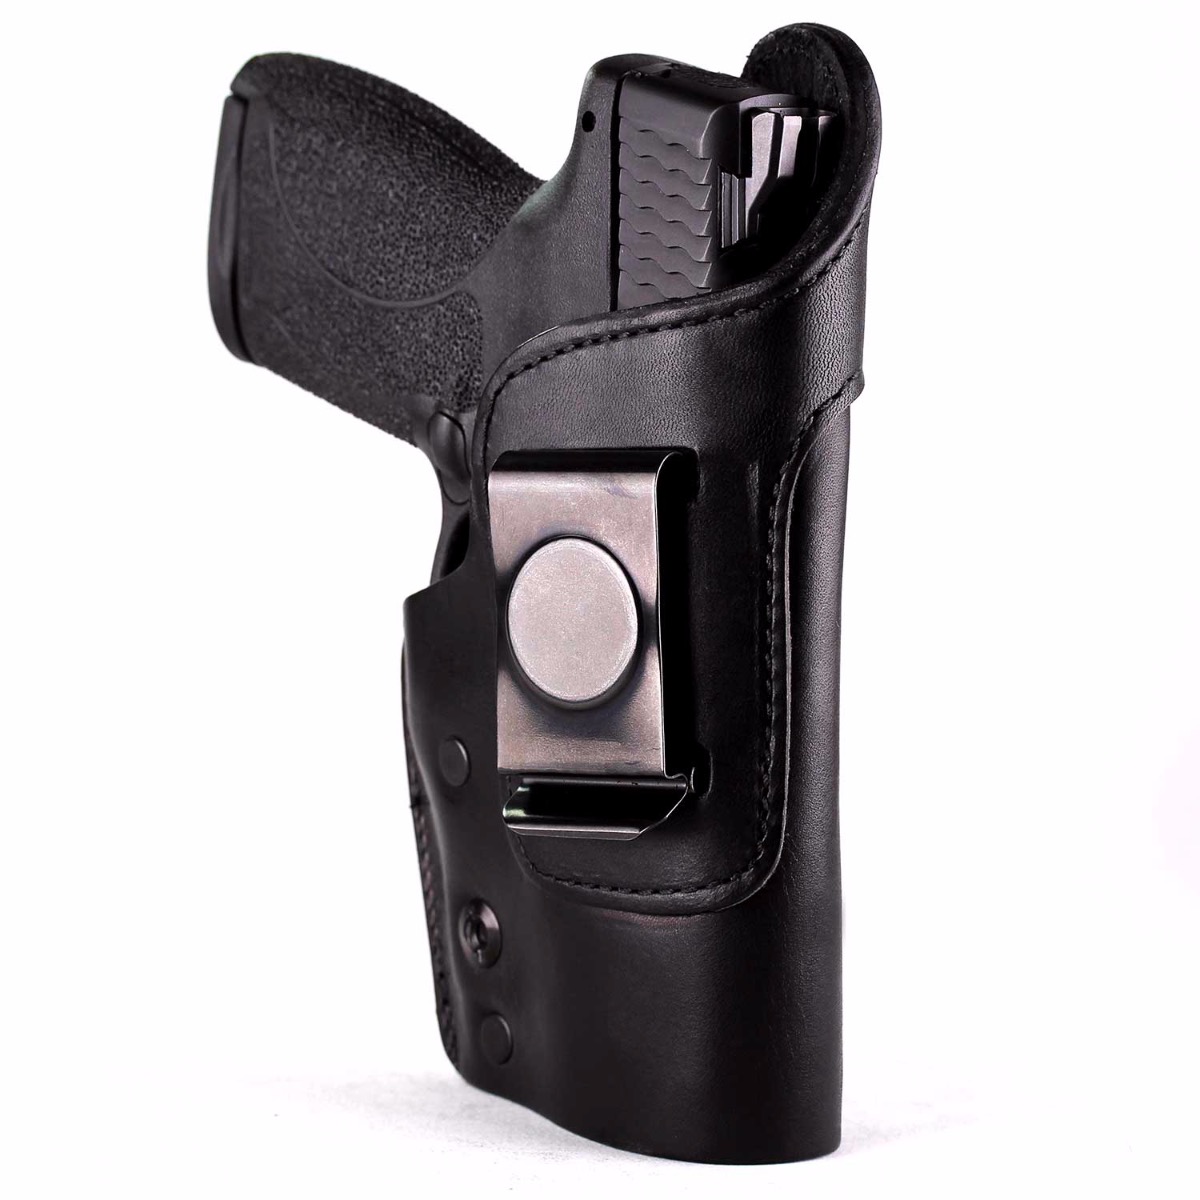 Details about   VLTactical Kydex IWB Holsters For Makarov Pistol with Leather Lining & Free Ship 